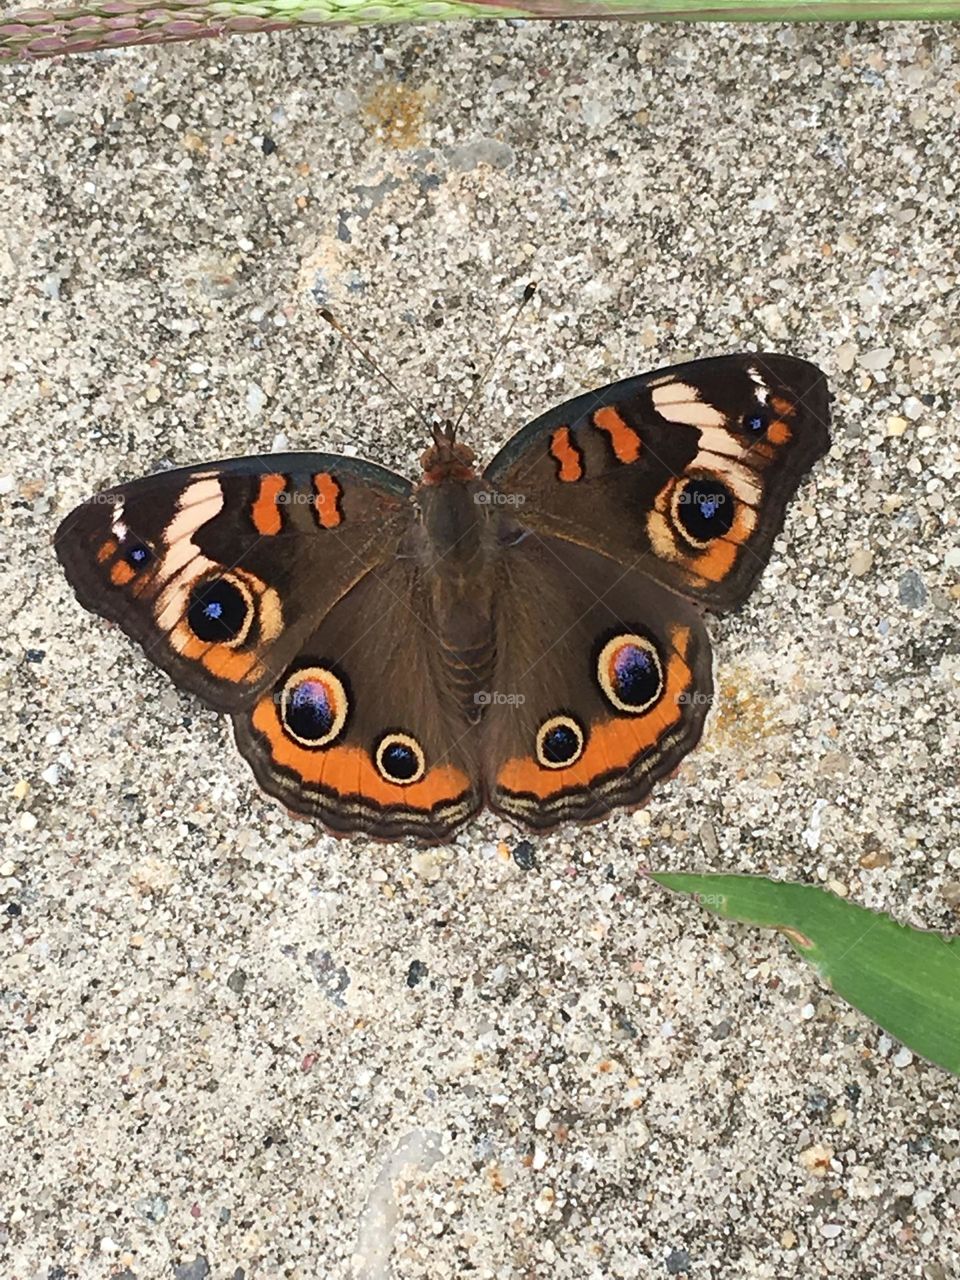 Buckeye moth taking a rest on pavement one summer day